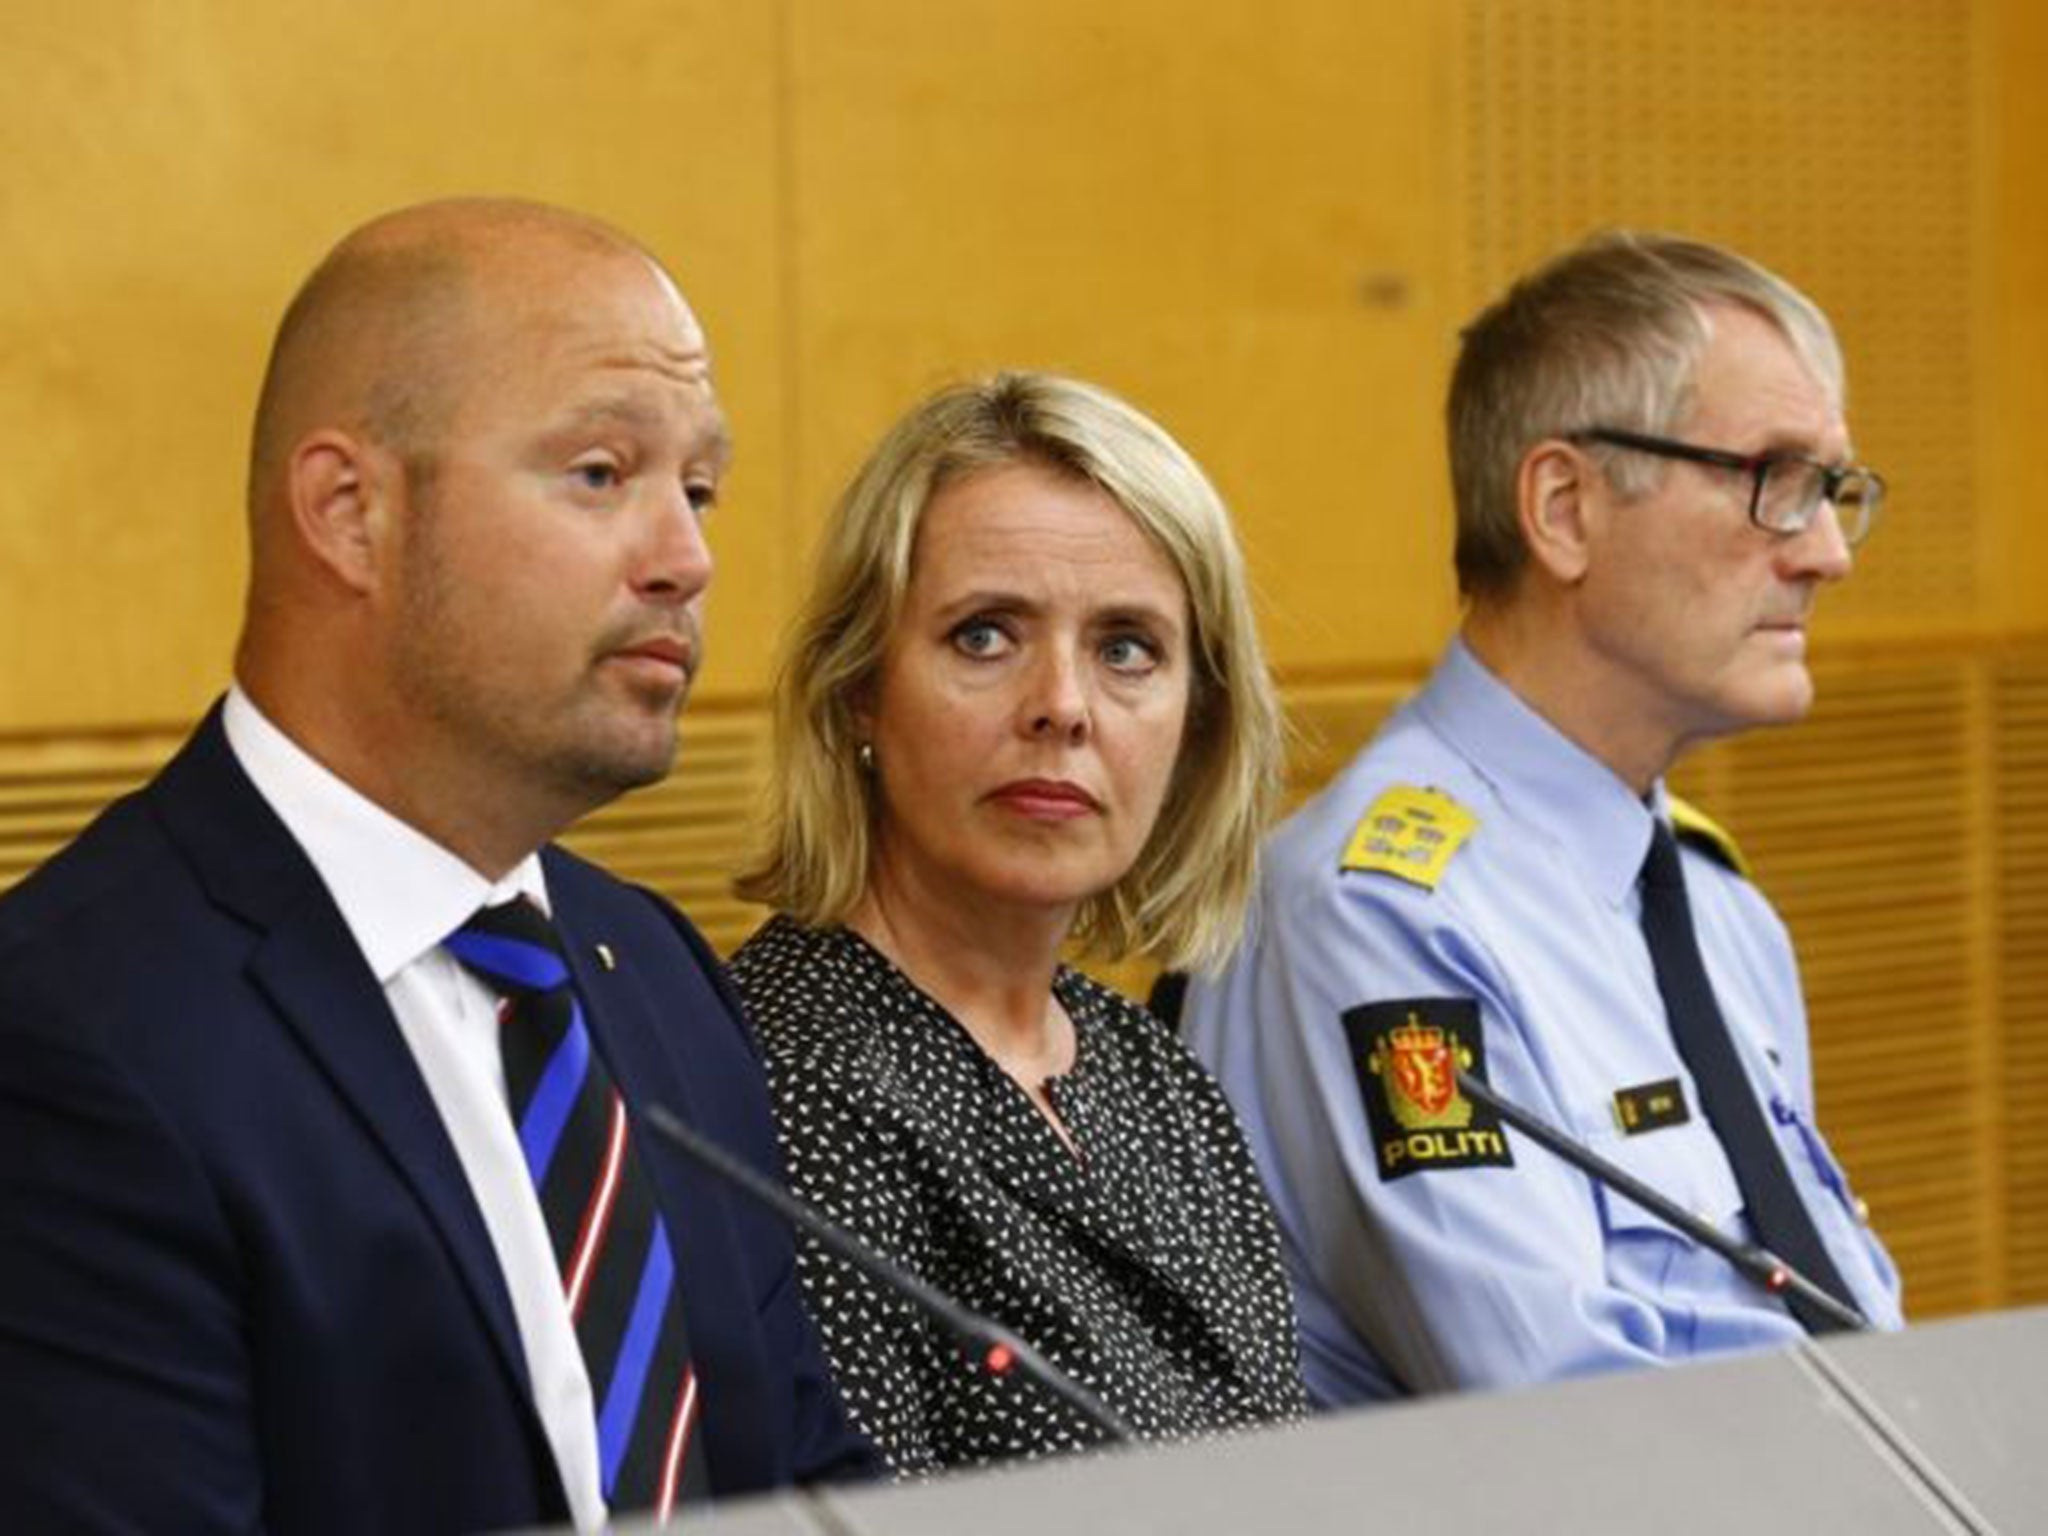 Minister of Justice and Public Security, Anders Anundsen, left, the head of the Norwegian intelligence service (PST), Benedicte Bjoernland and head of the police Vidar Refvik, right, during a press conference in Oslo on Thursday, 24 July, 2014